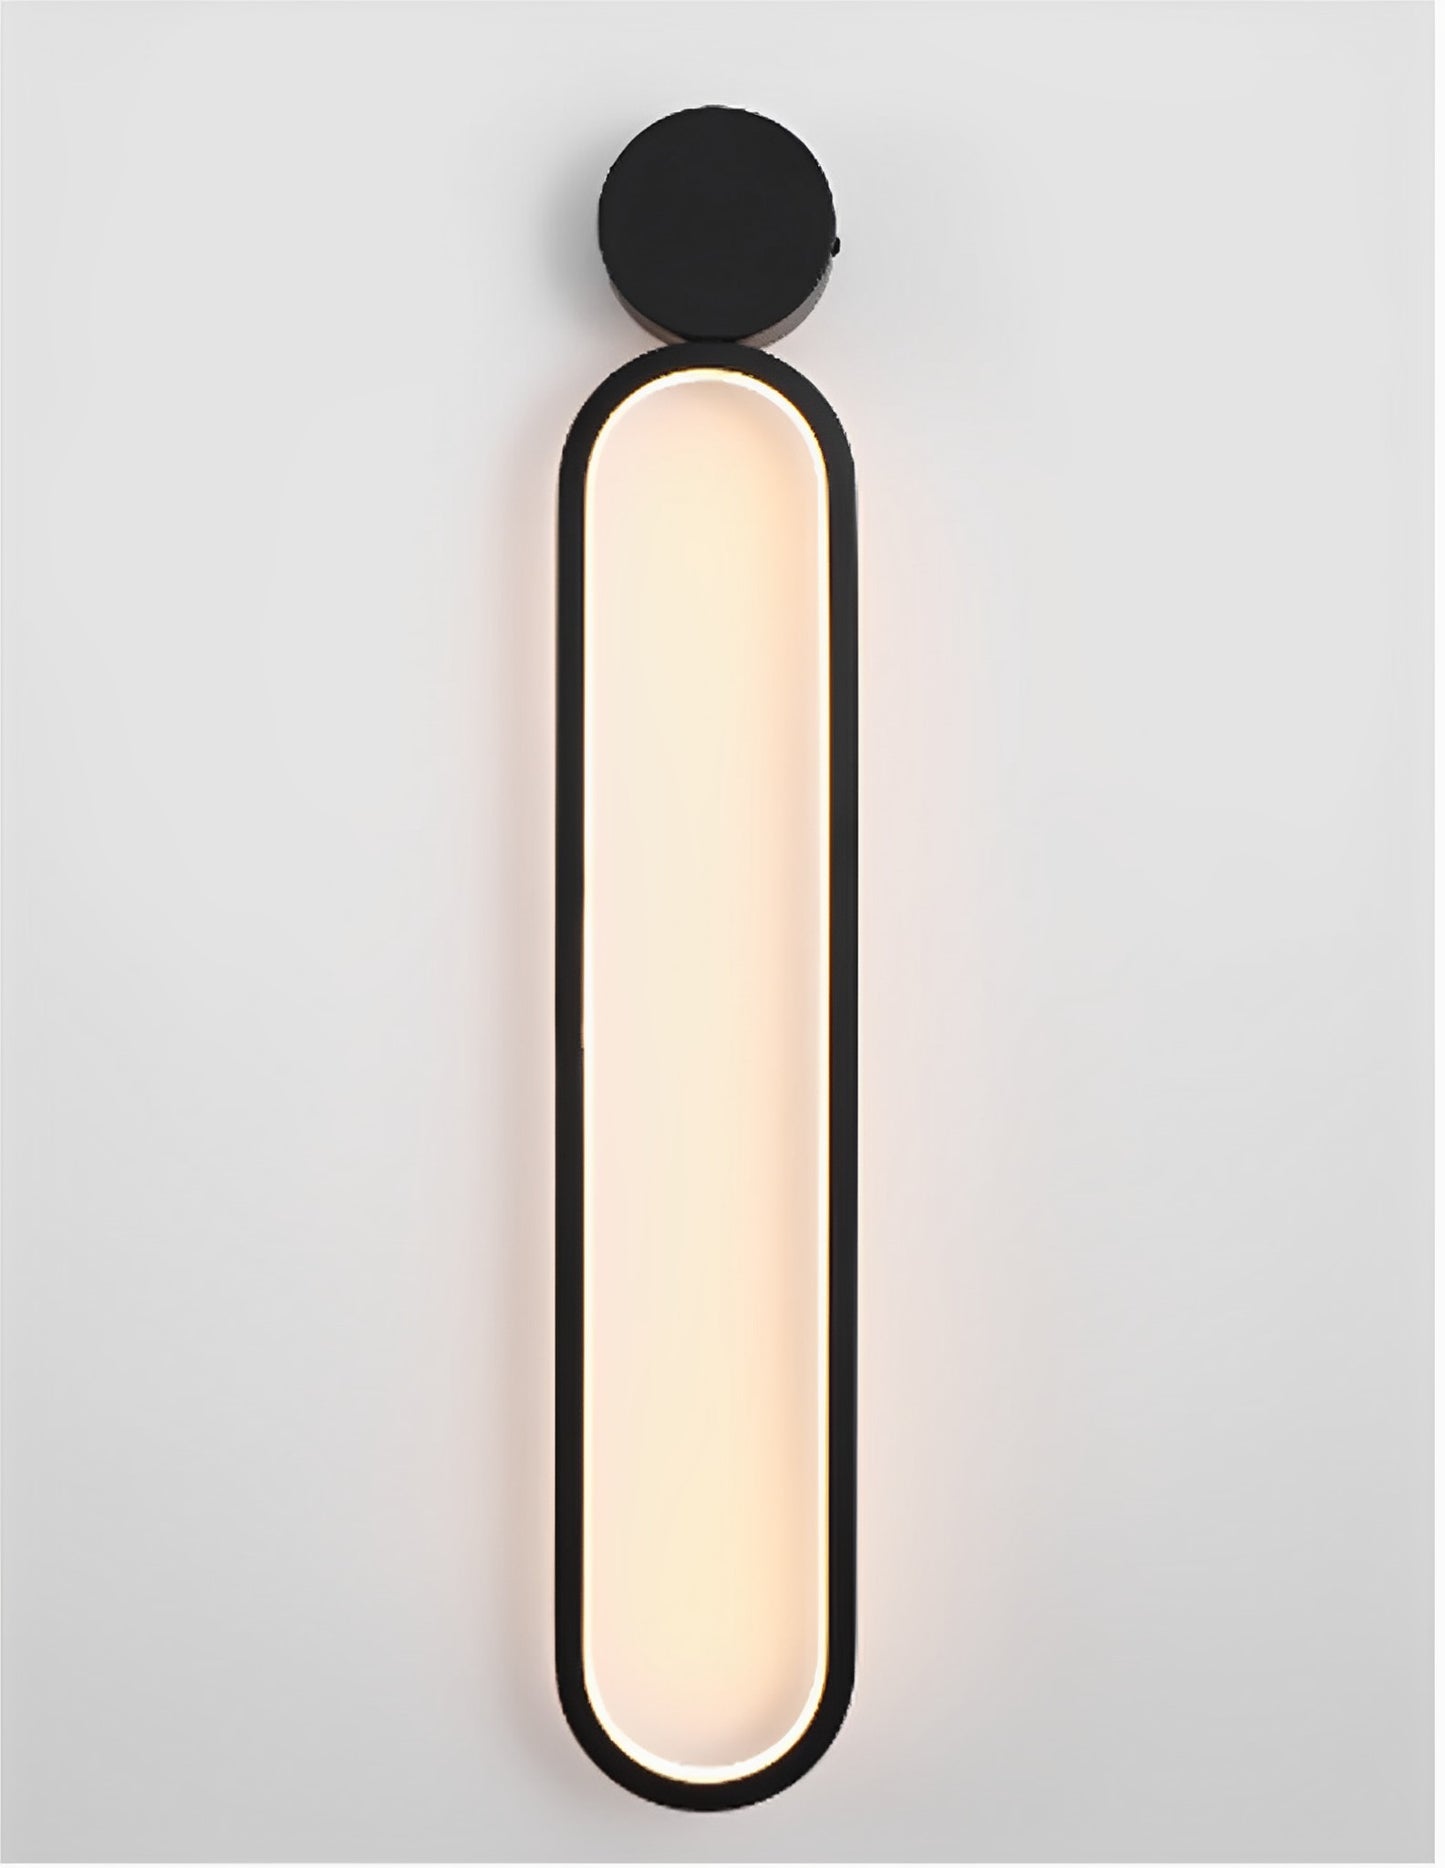 Load image into Gallery viewer, Modern Long LED Wall Lamp by Gloss (6802)
